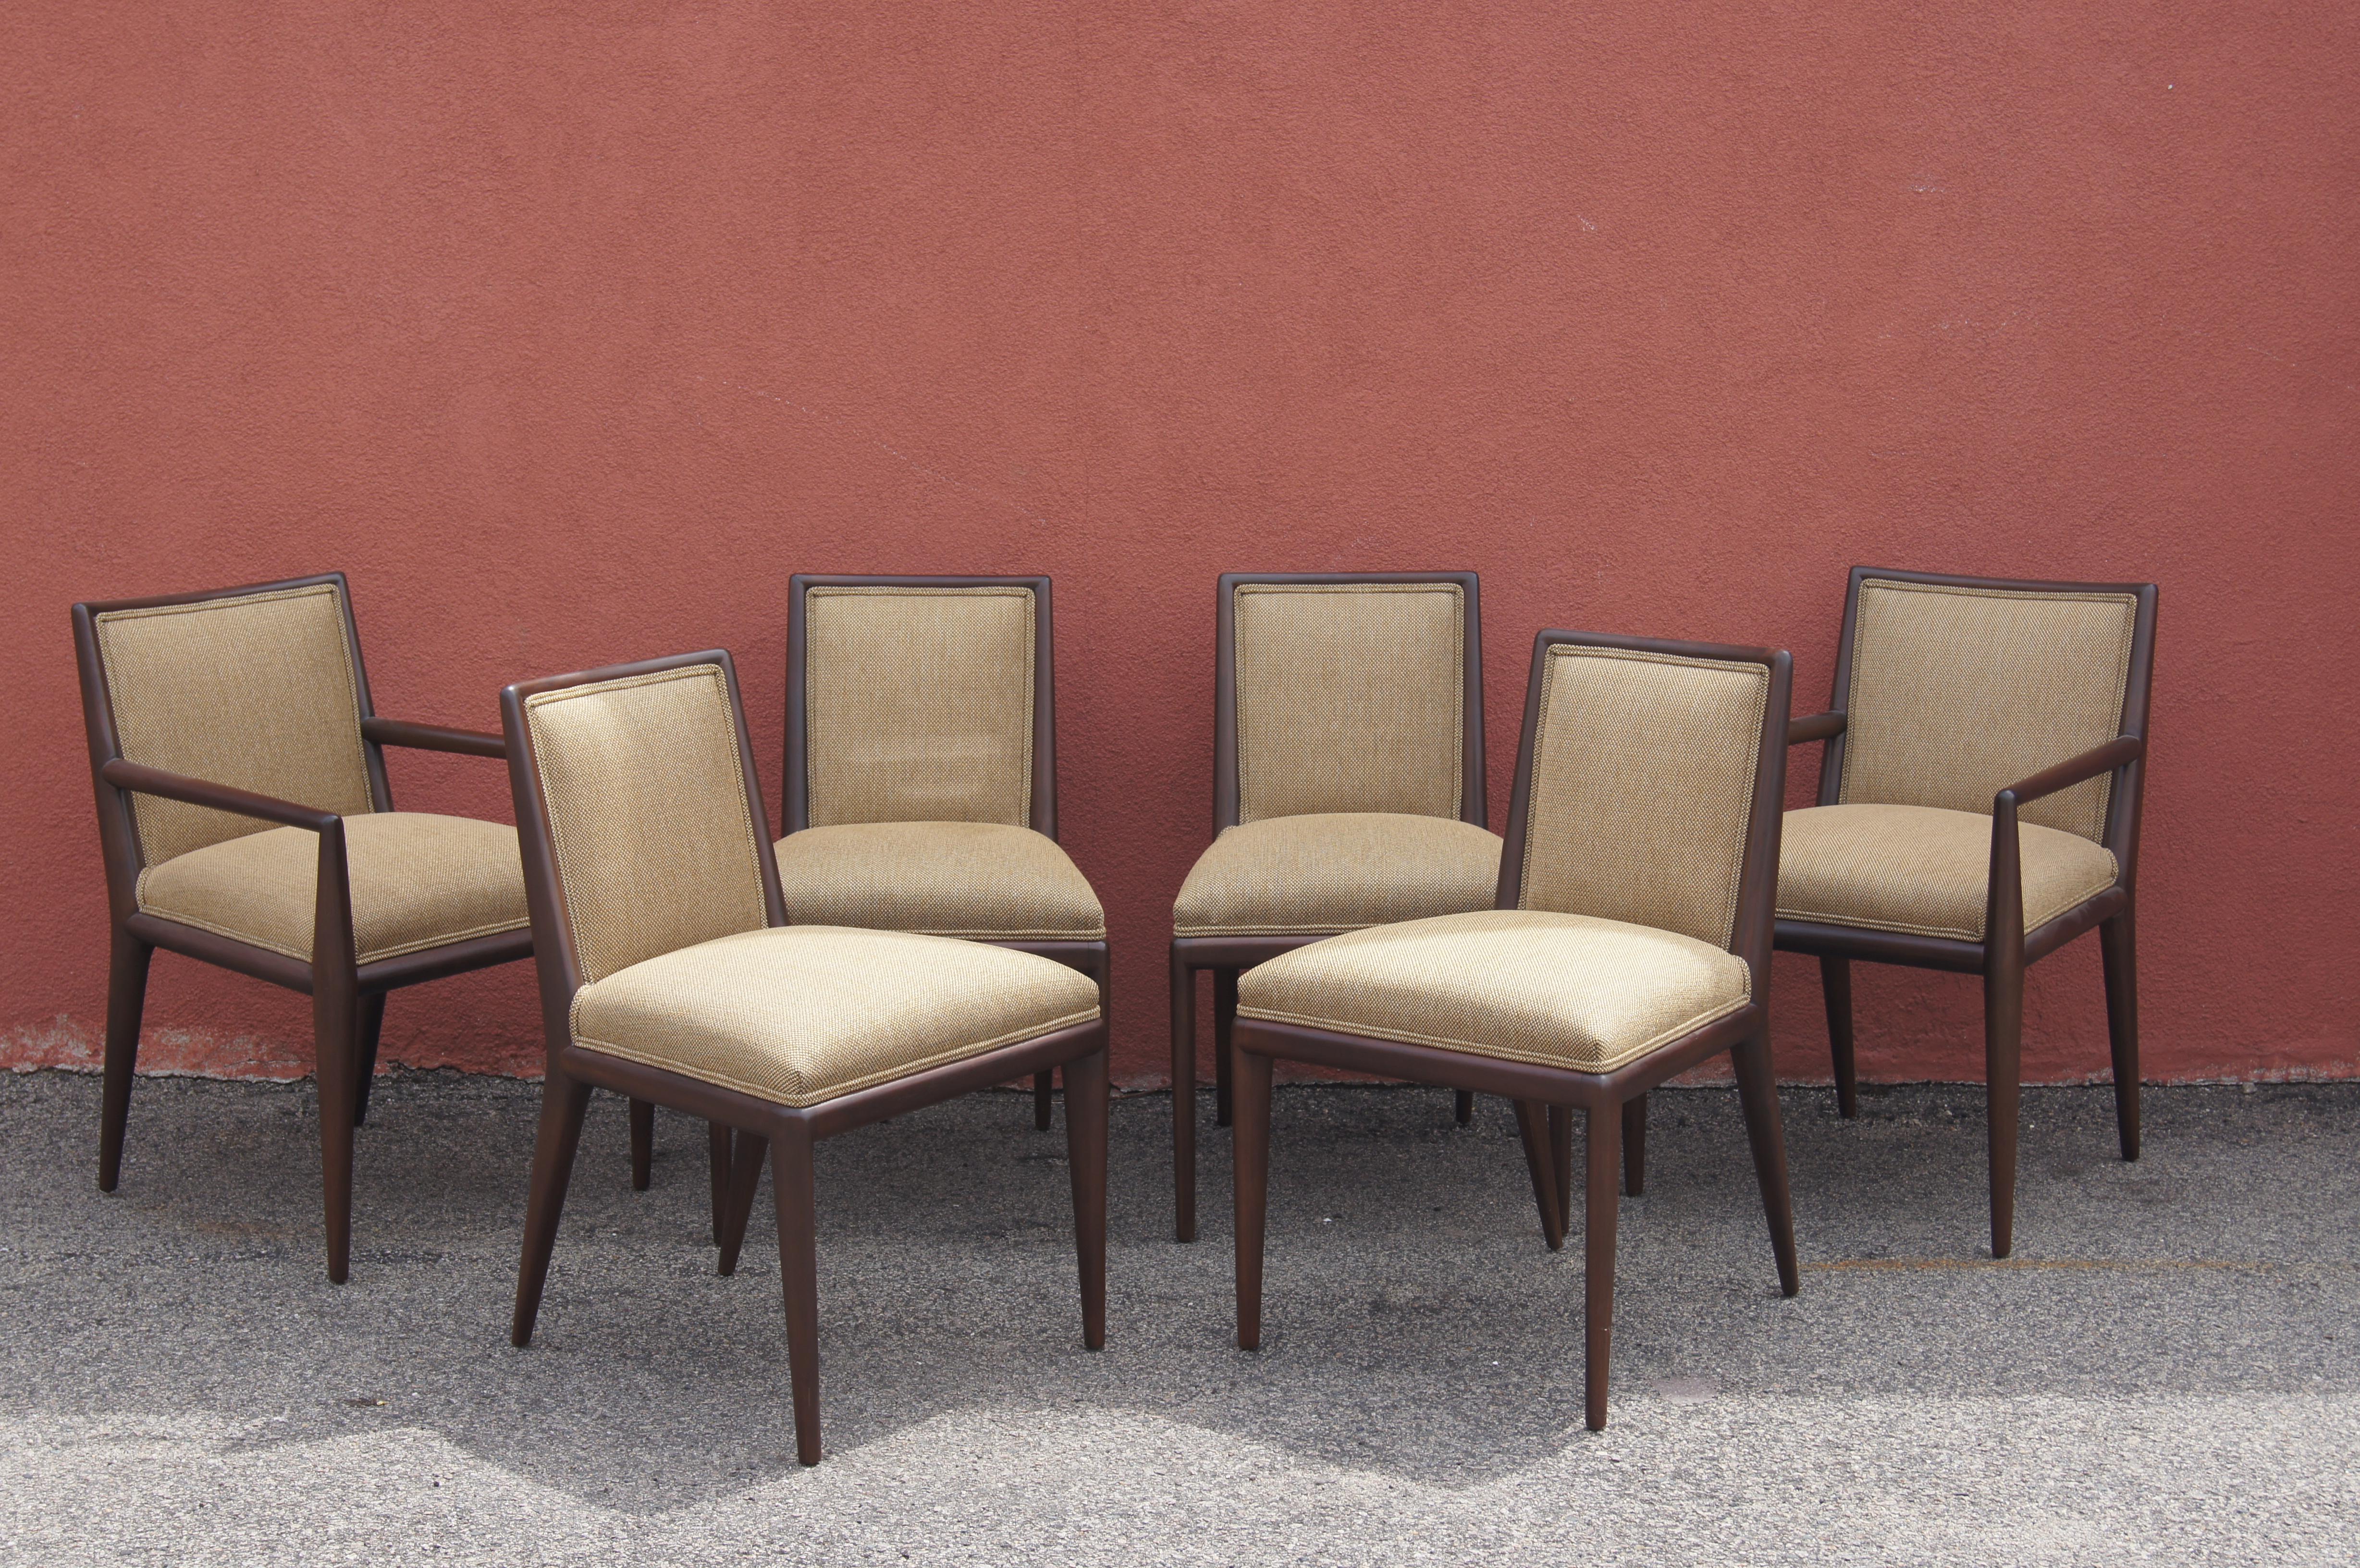 T.H. Robsjohn-Gibbings designed this elegant set of six dining chairs for Widdicomb. The slender walnut frames feature canted legs, tapered backs, and comfortable seats. The chairs have been newly reupholstered in a woven Knoll textile that blends